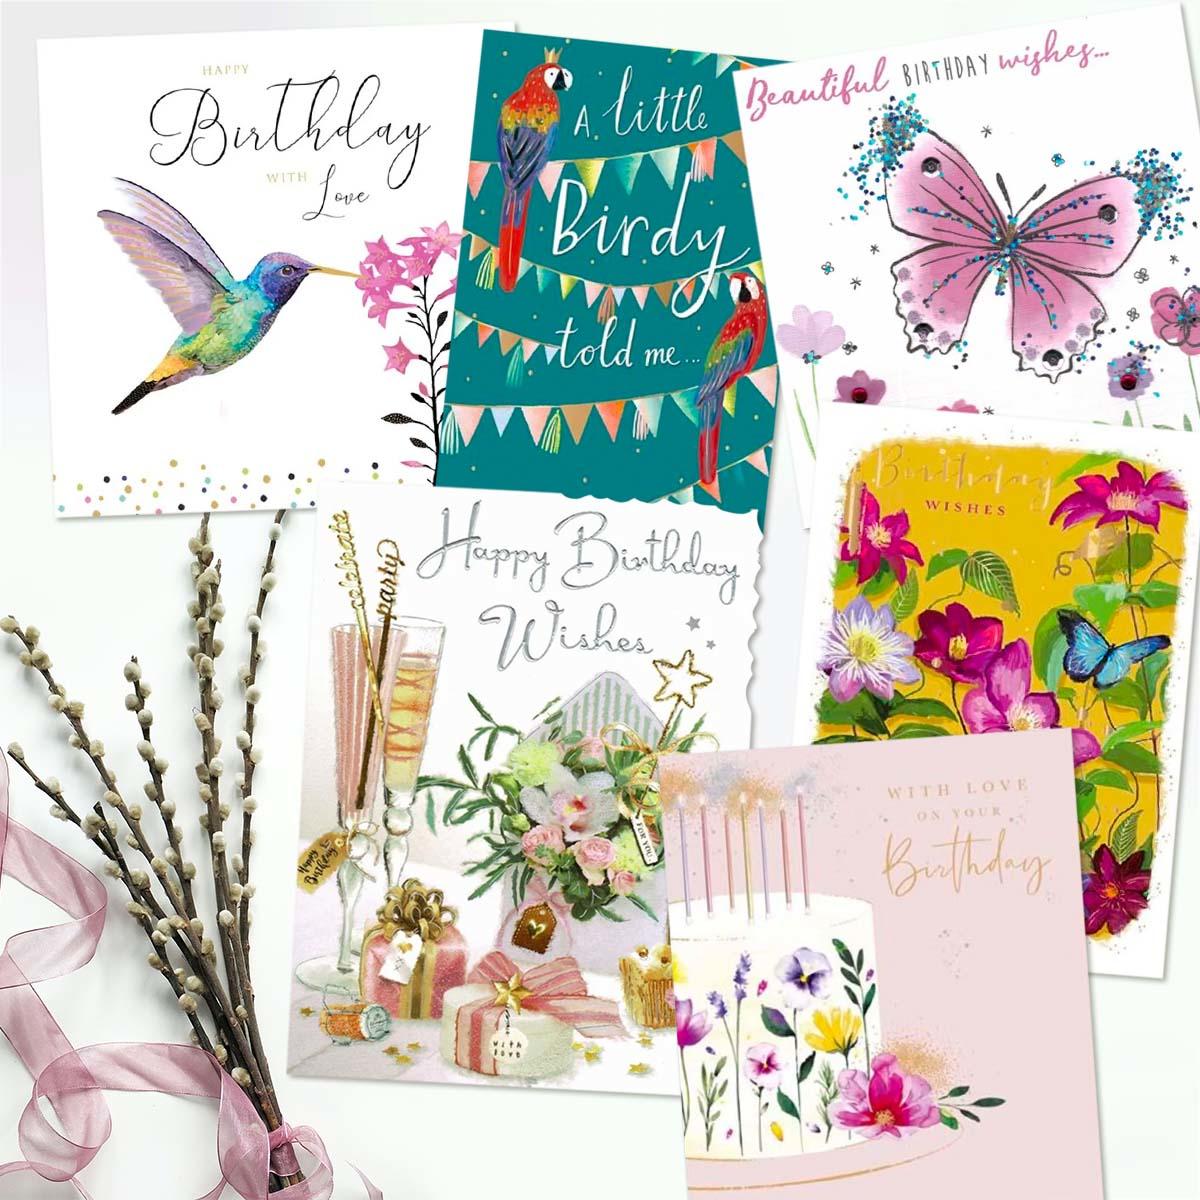 A Selection Of Cards To Show The Depth Of Range In Our Female Birthday Cards Section